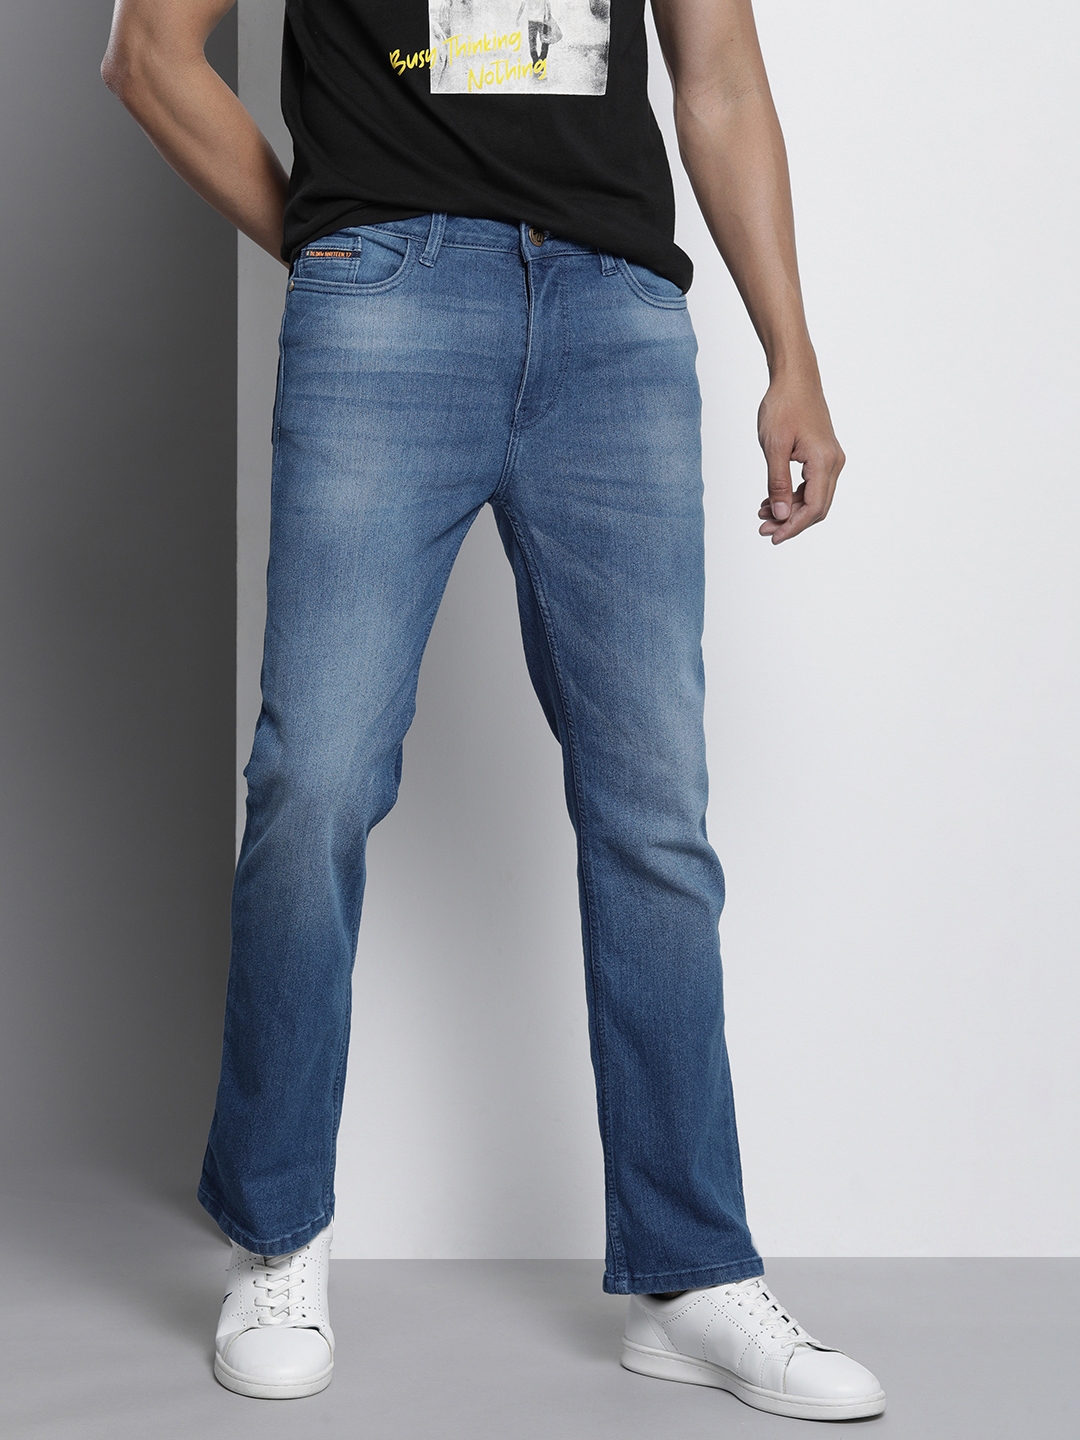 Buy The Indian Garage Co Men Bootcut Light Fade Stretchable Jeans ...